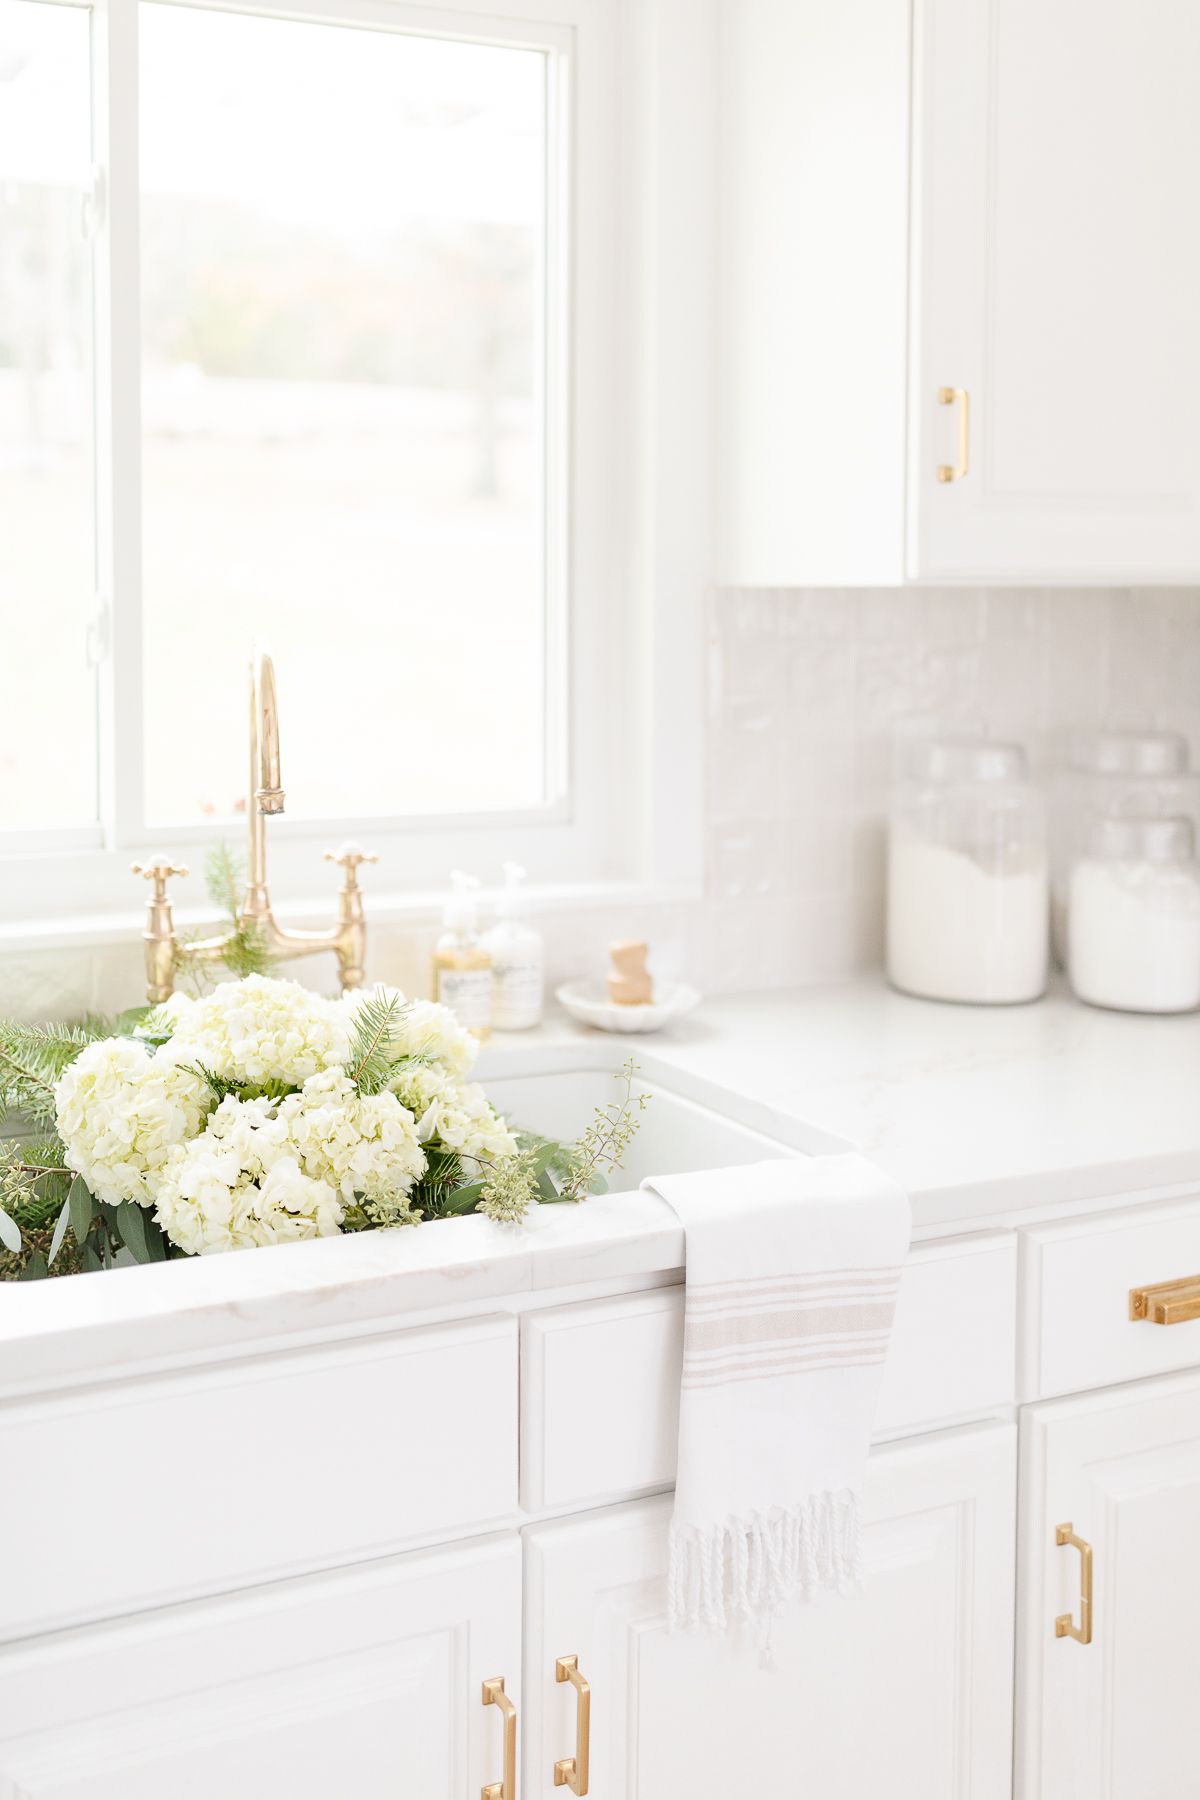 A white kitchen with flower in the sink, brass faucet and white backsplash